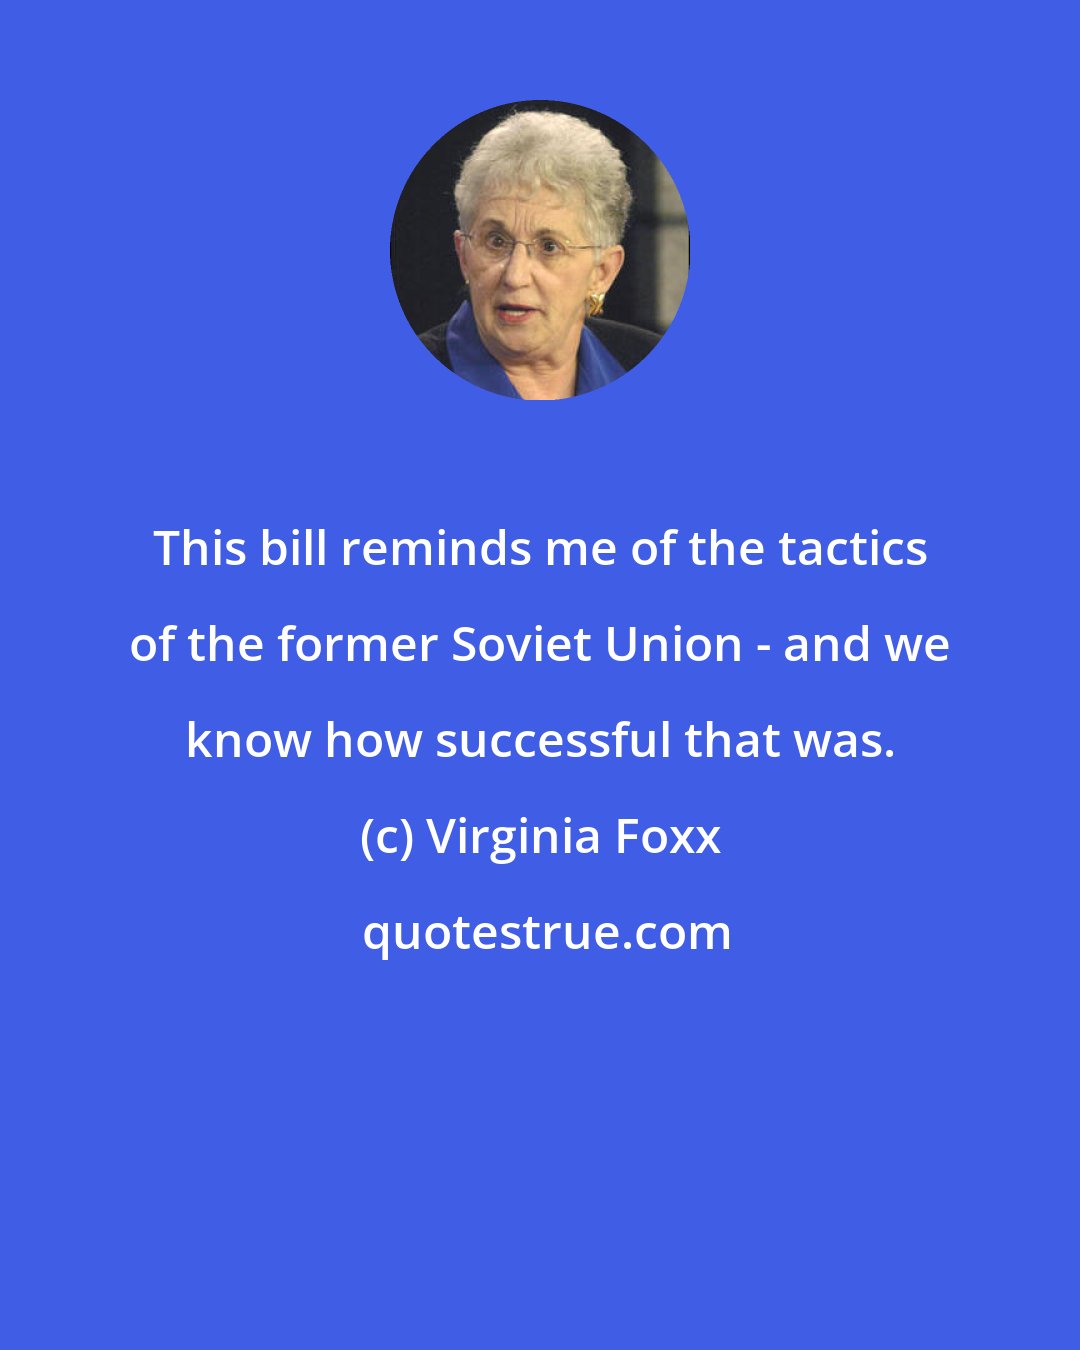 Virginia Foxx: This bill reminds me of the tactics of the former Soviet Union - and we know how successful that was.